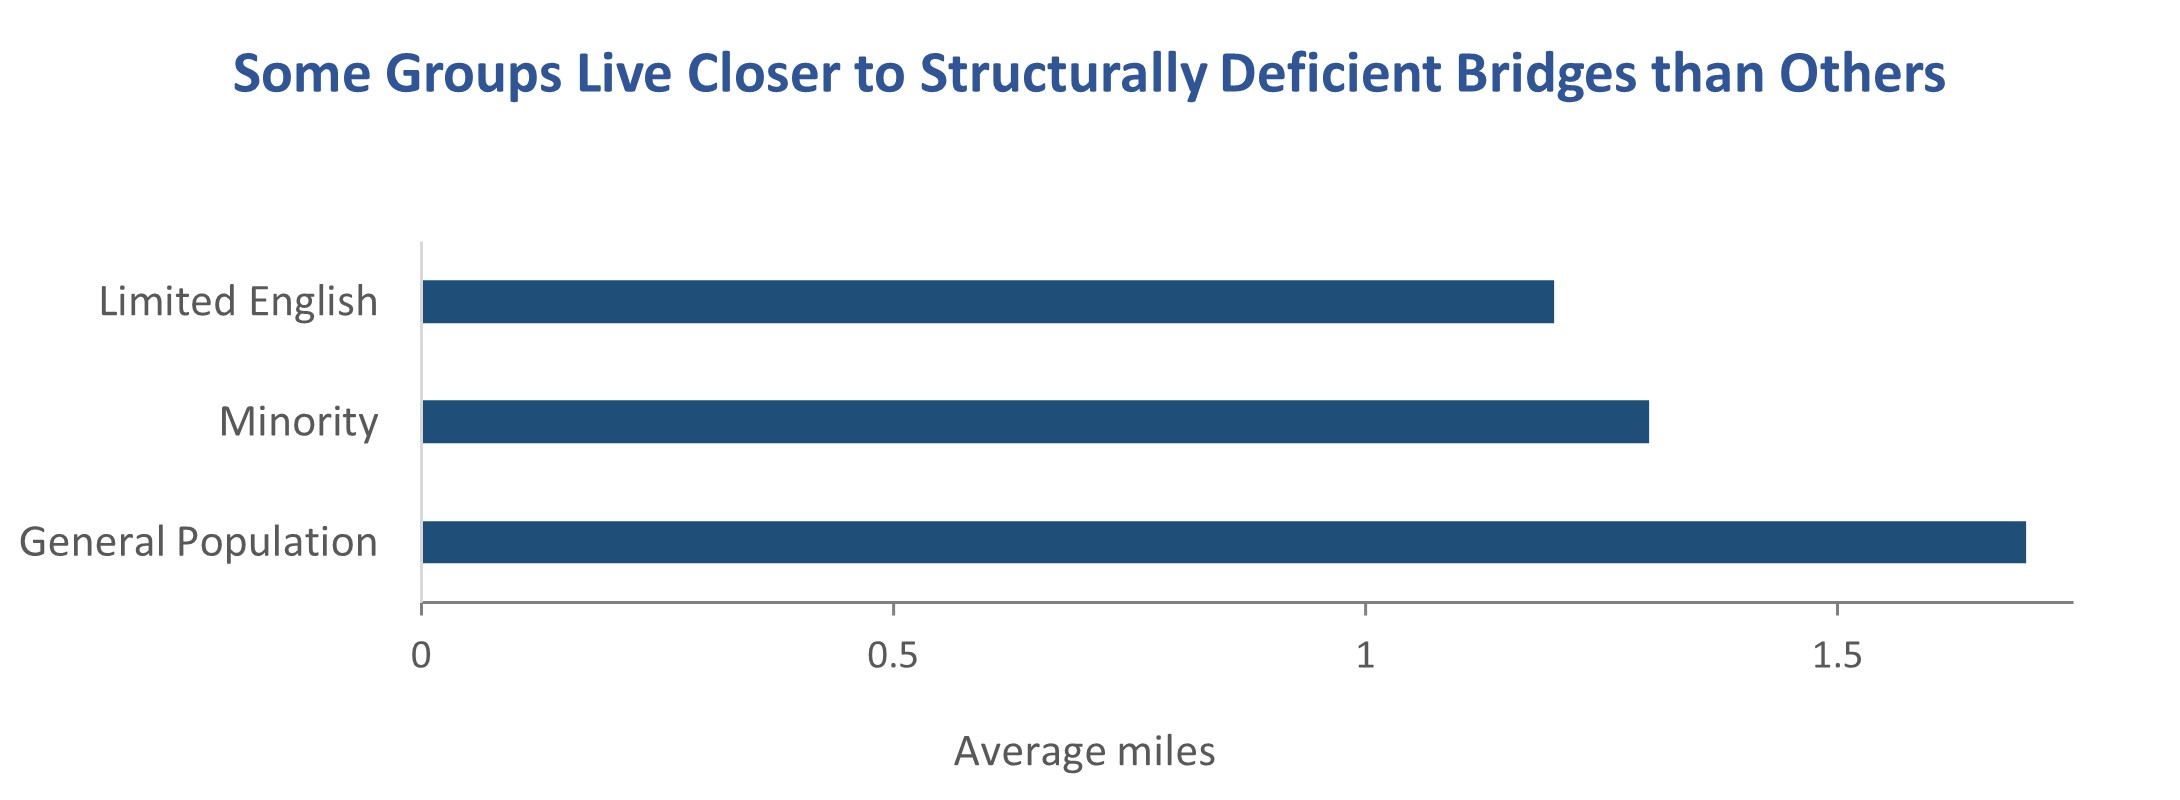 Graph showing different categories' average distance to a structurally deficient bridge; the populations are limited English speaking, minorities, and the general/overall population